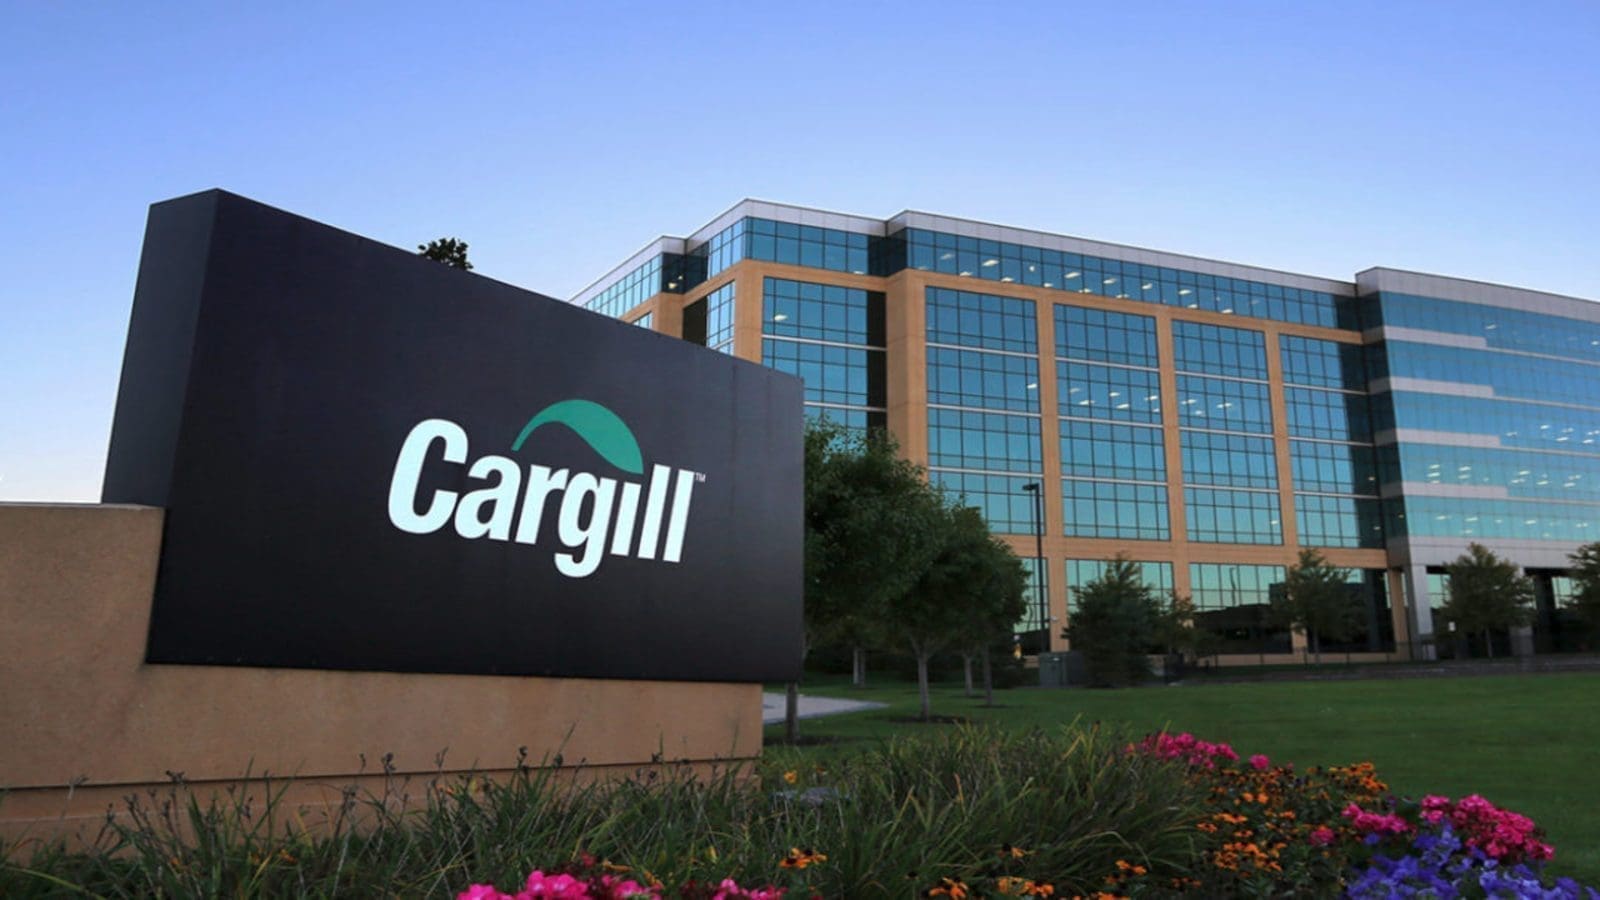 Cargill to close UK crush facility due to difficult market conditions